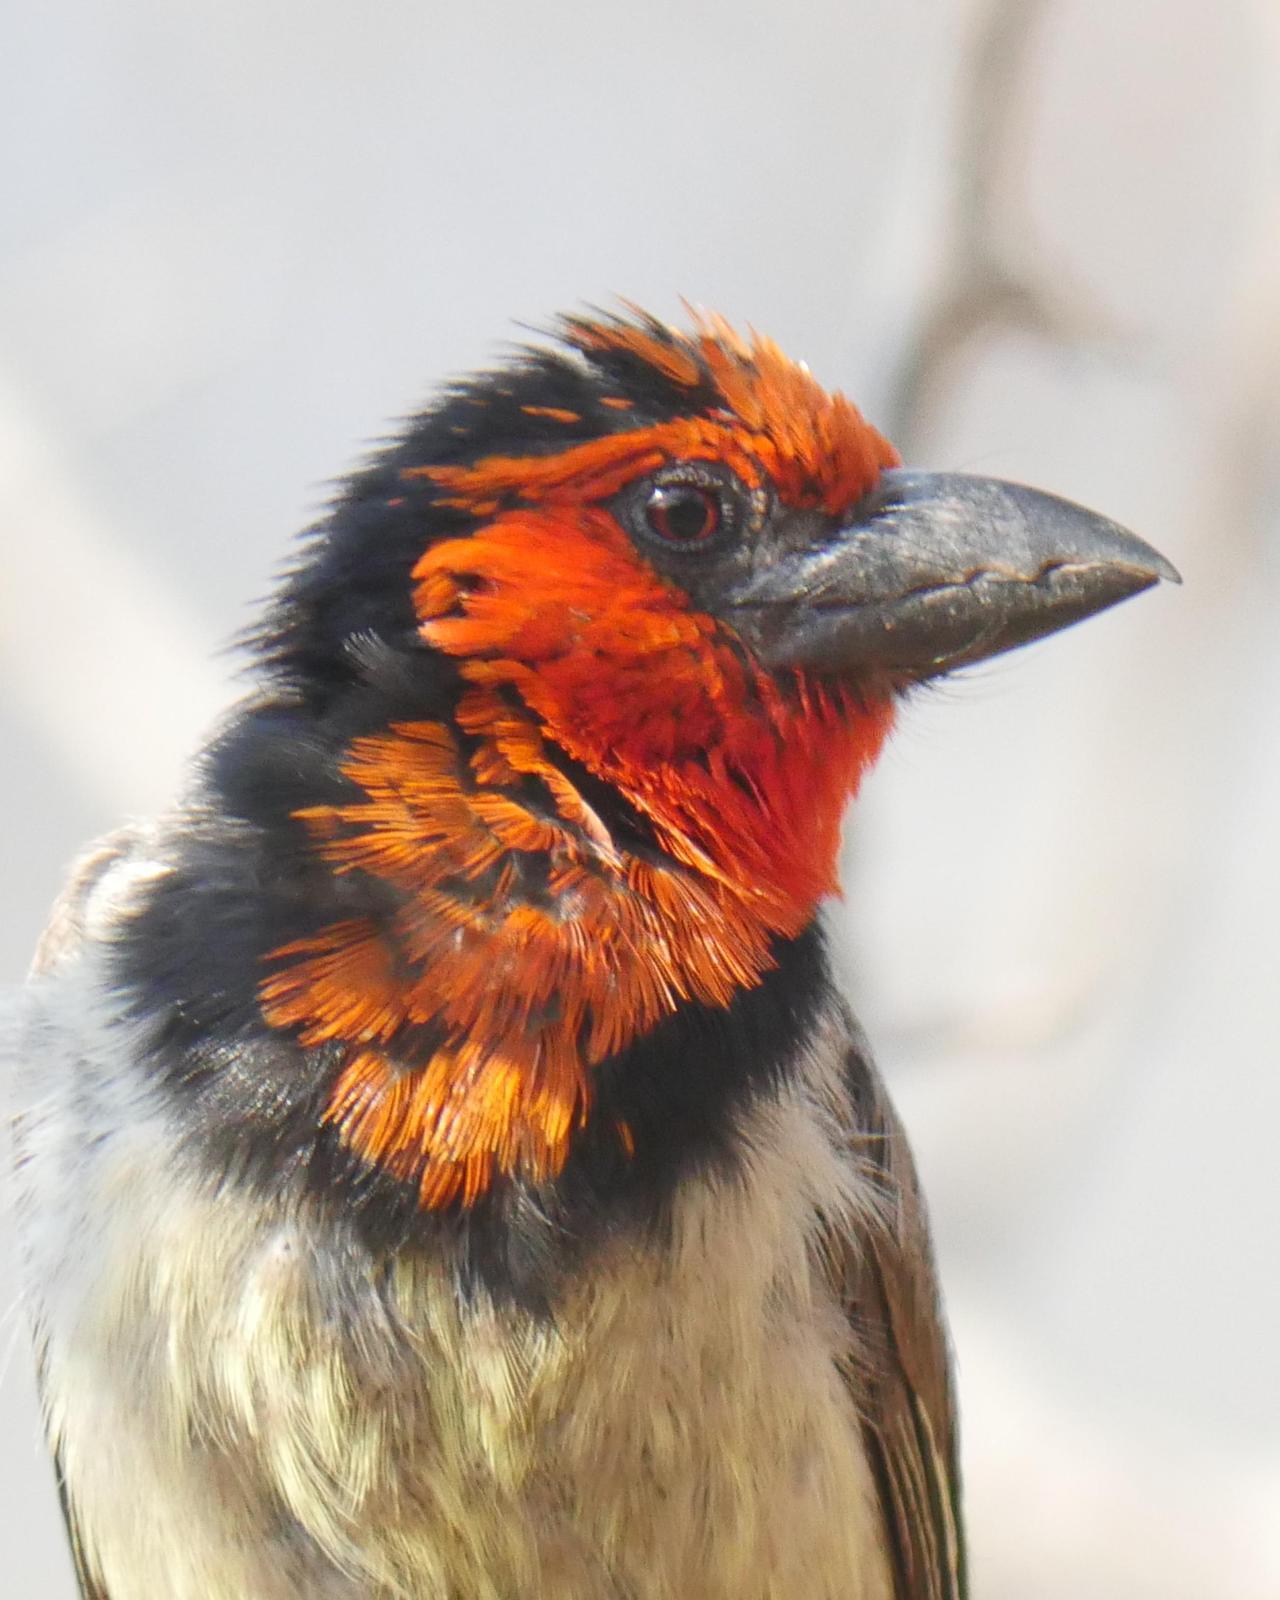 Black-collared Barbet Photo by Peter Lowe